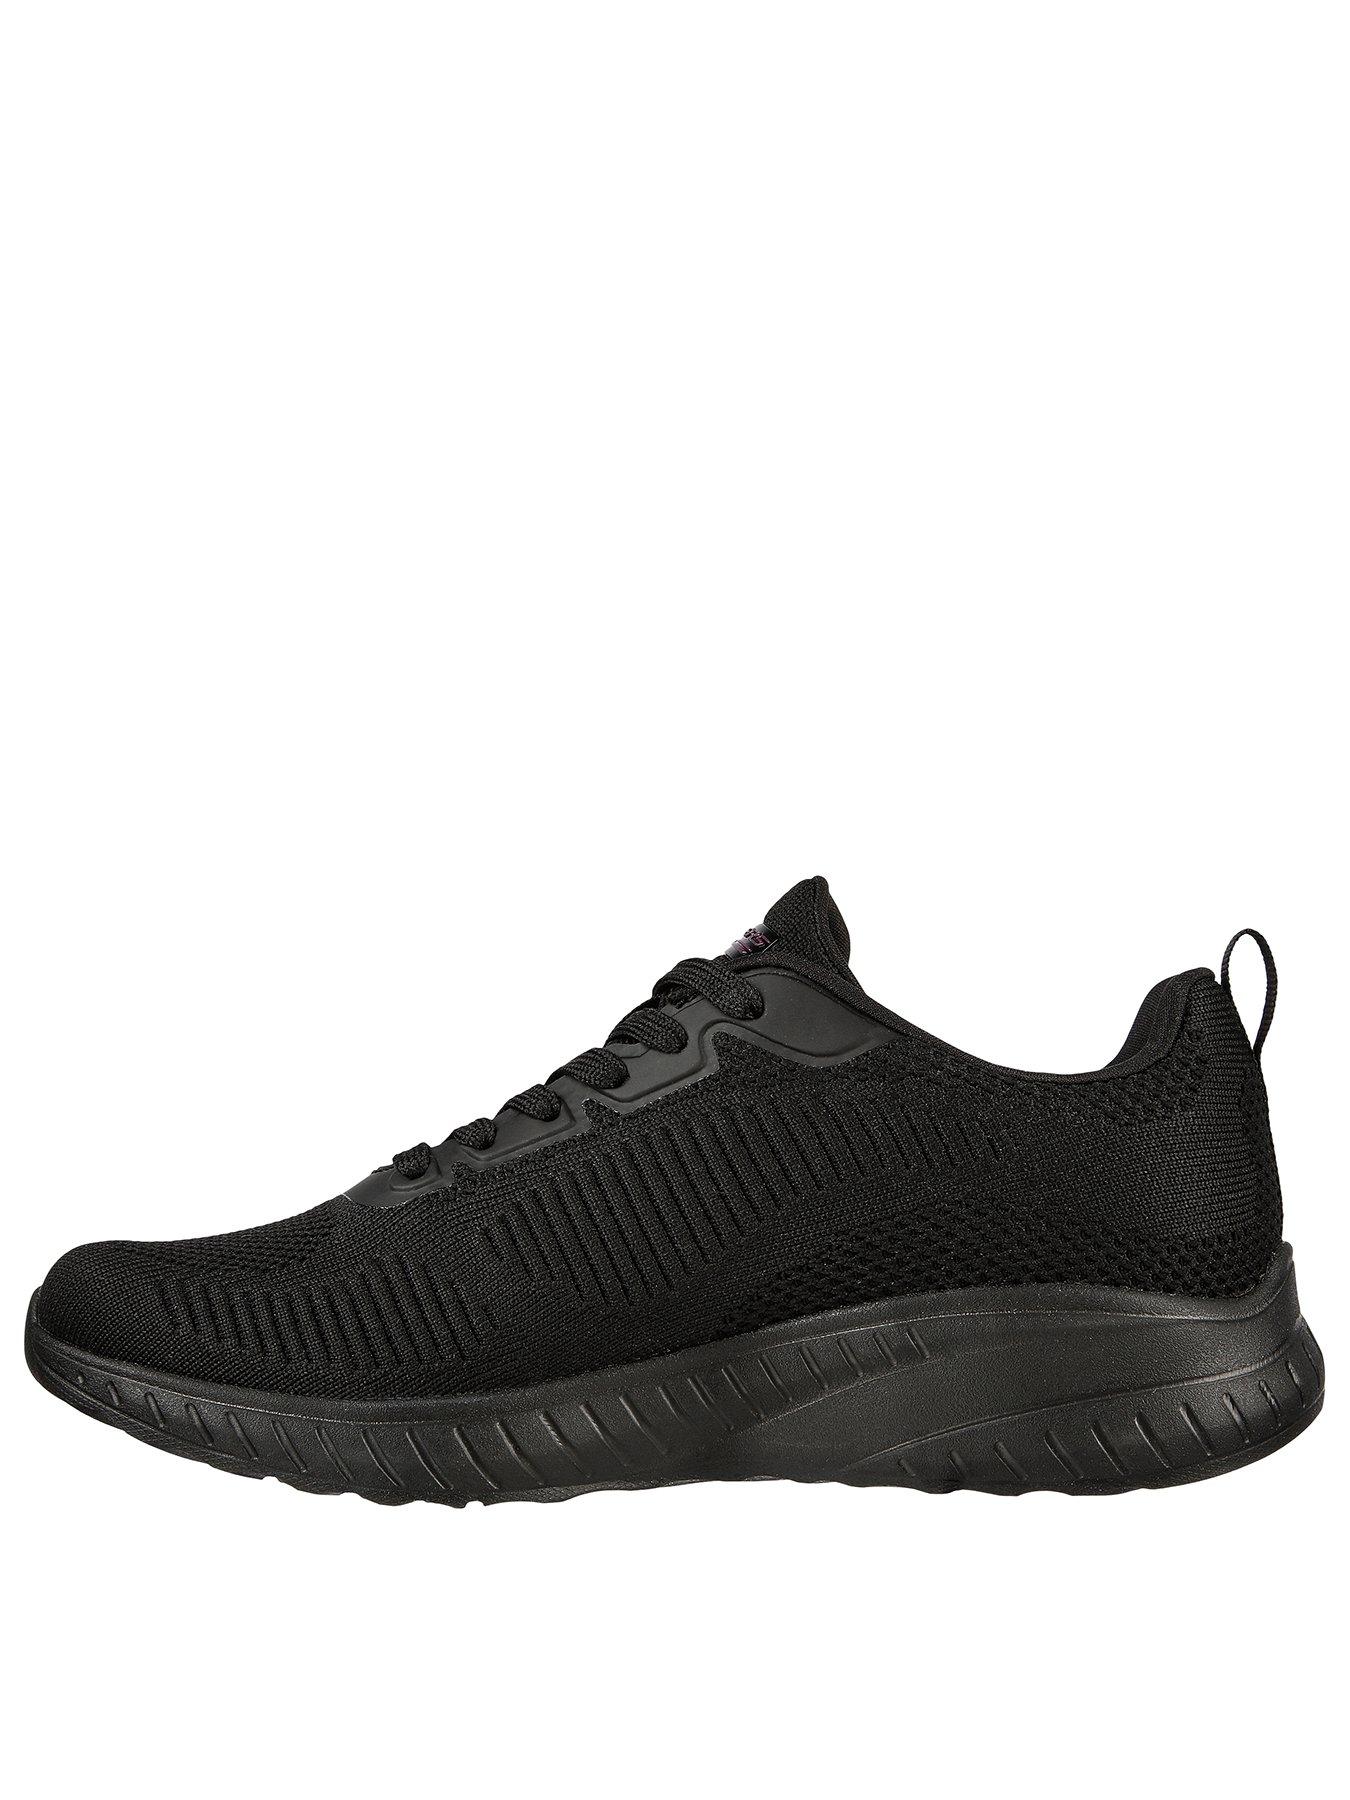 Skechers Bobs Squad Chaos Trainers - Black | very.co.uk